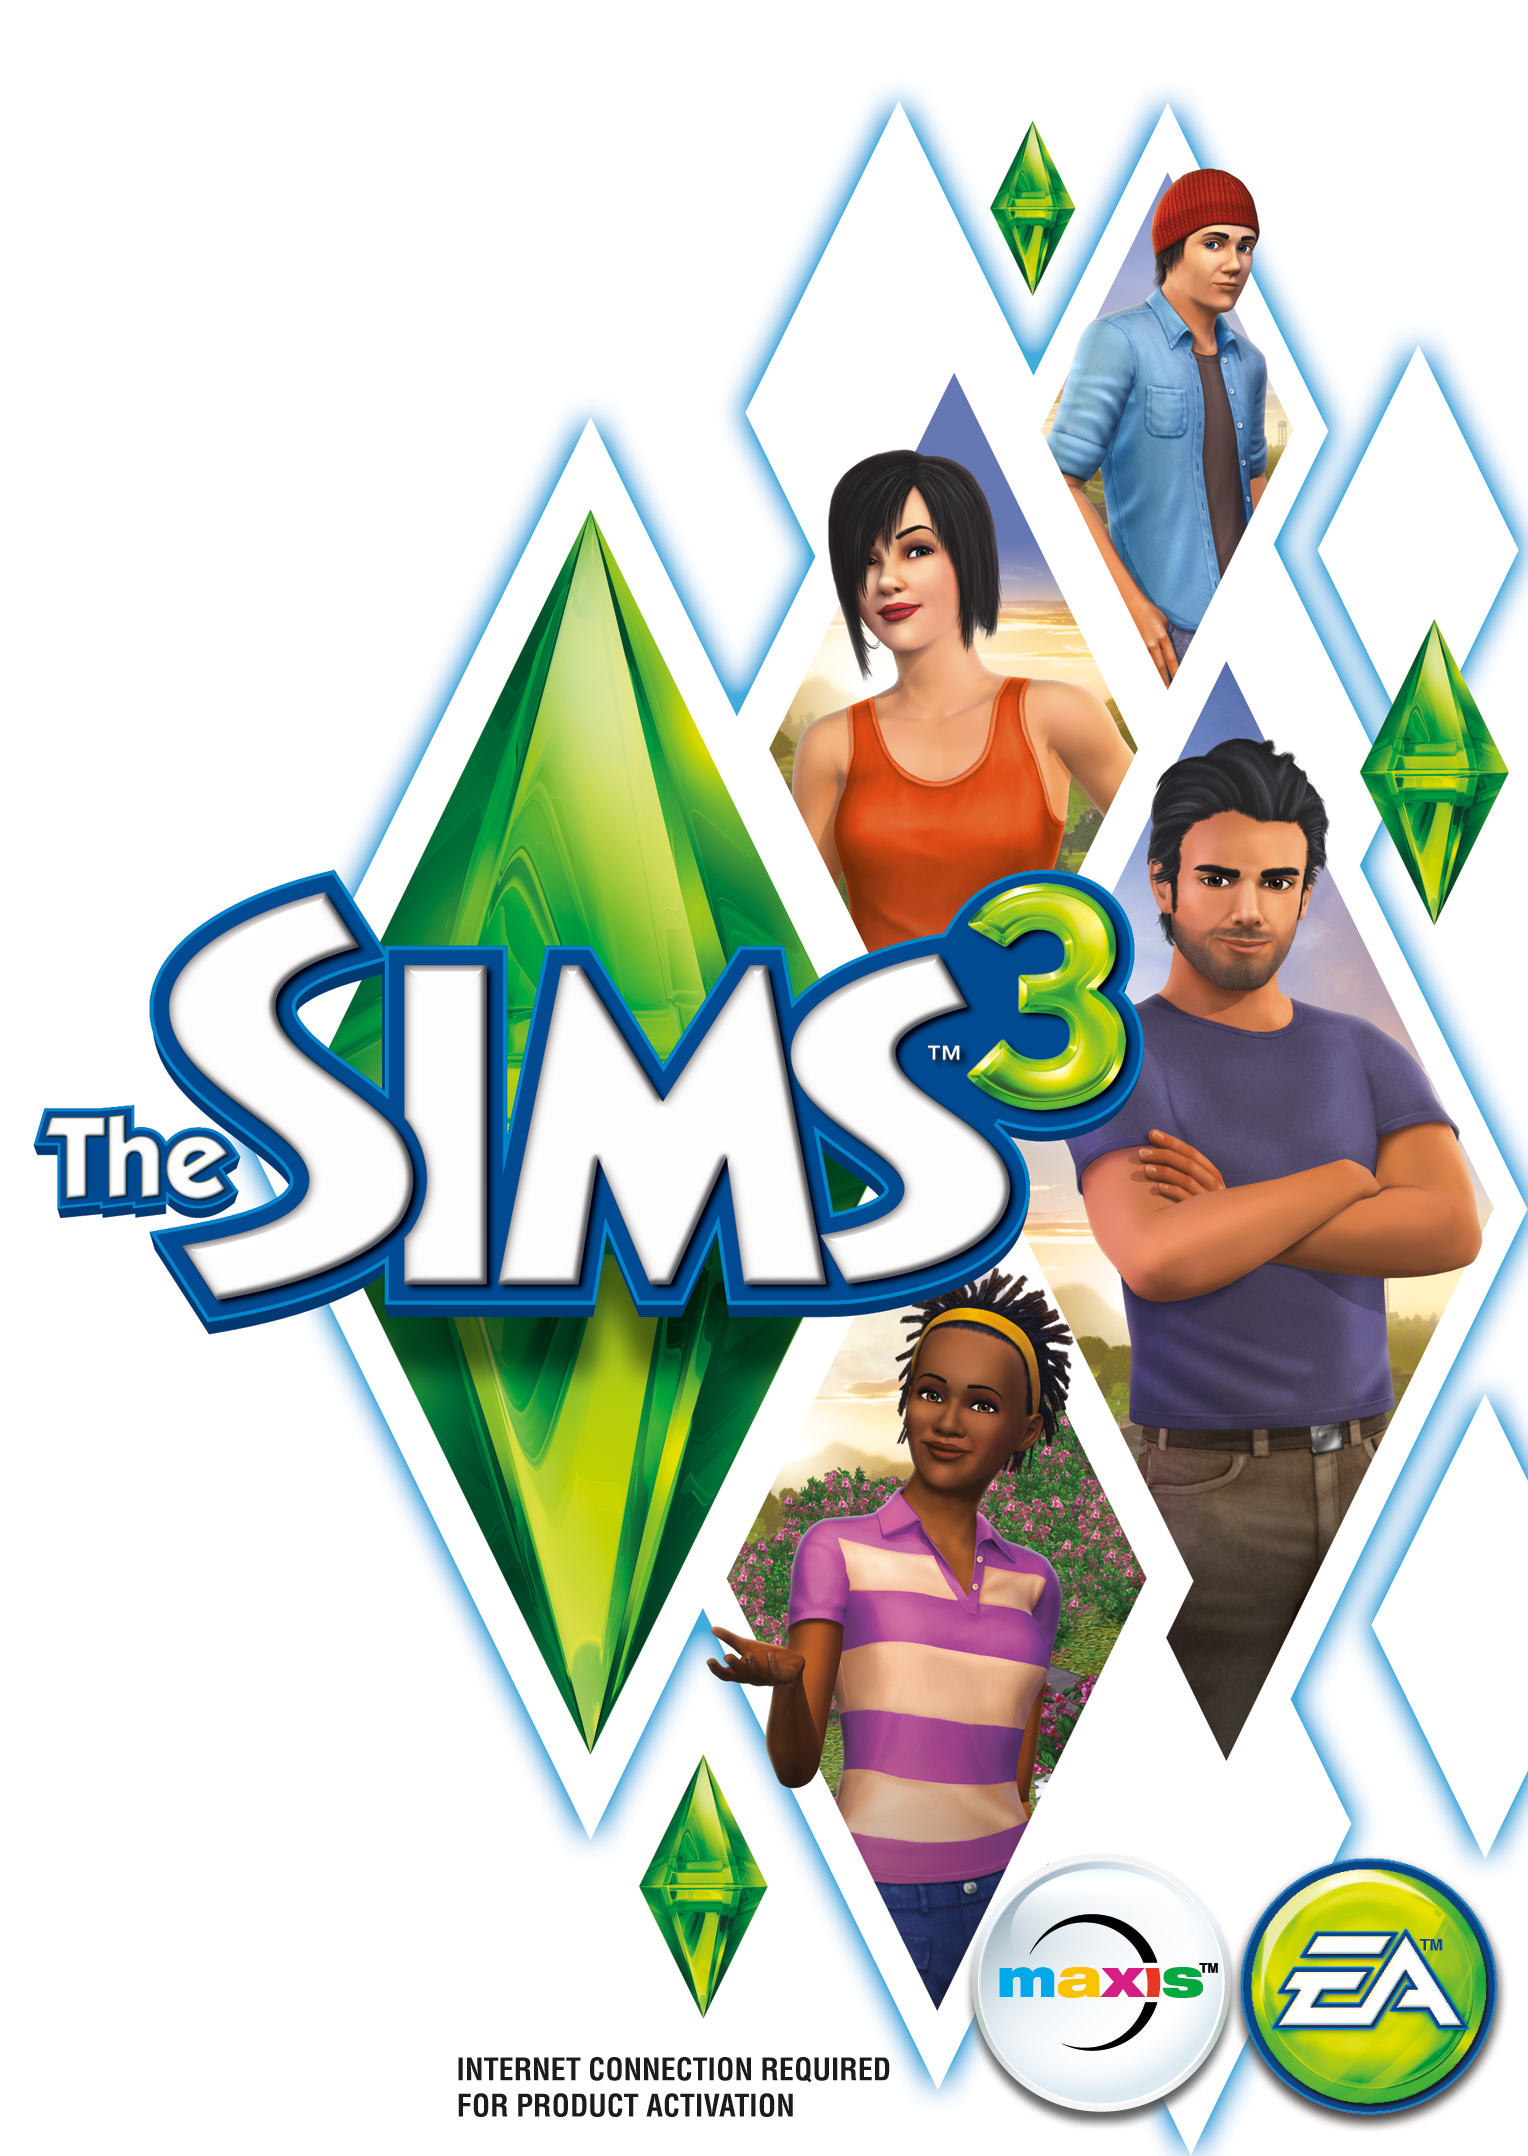 Sims 3 For Ppsspp Android